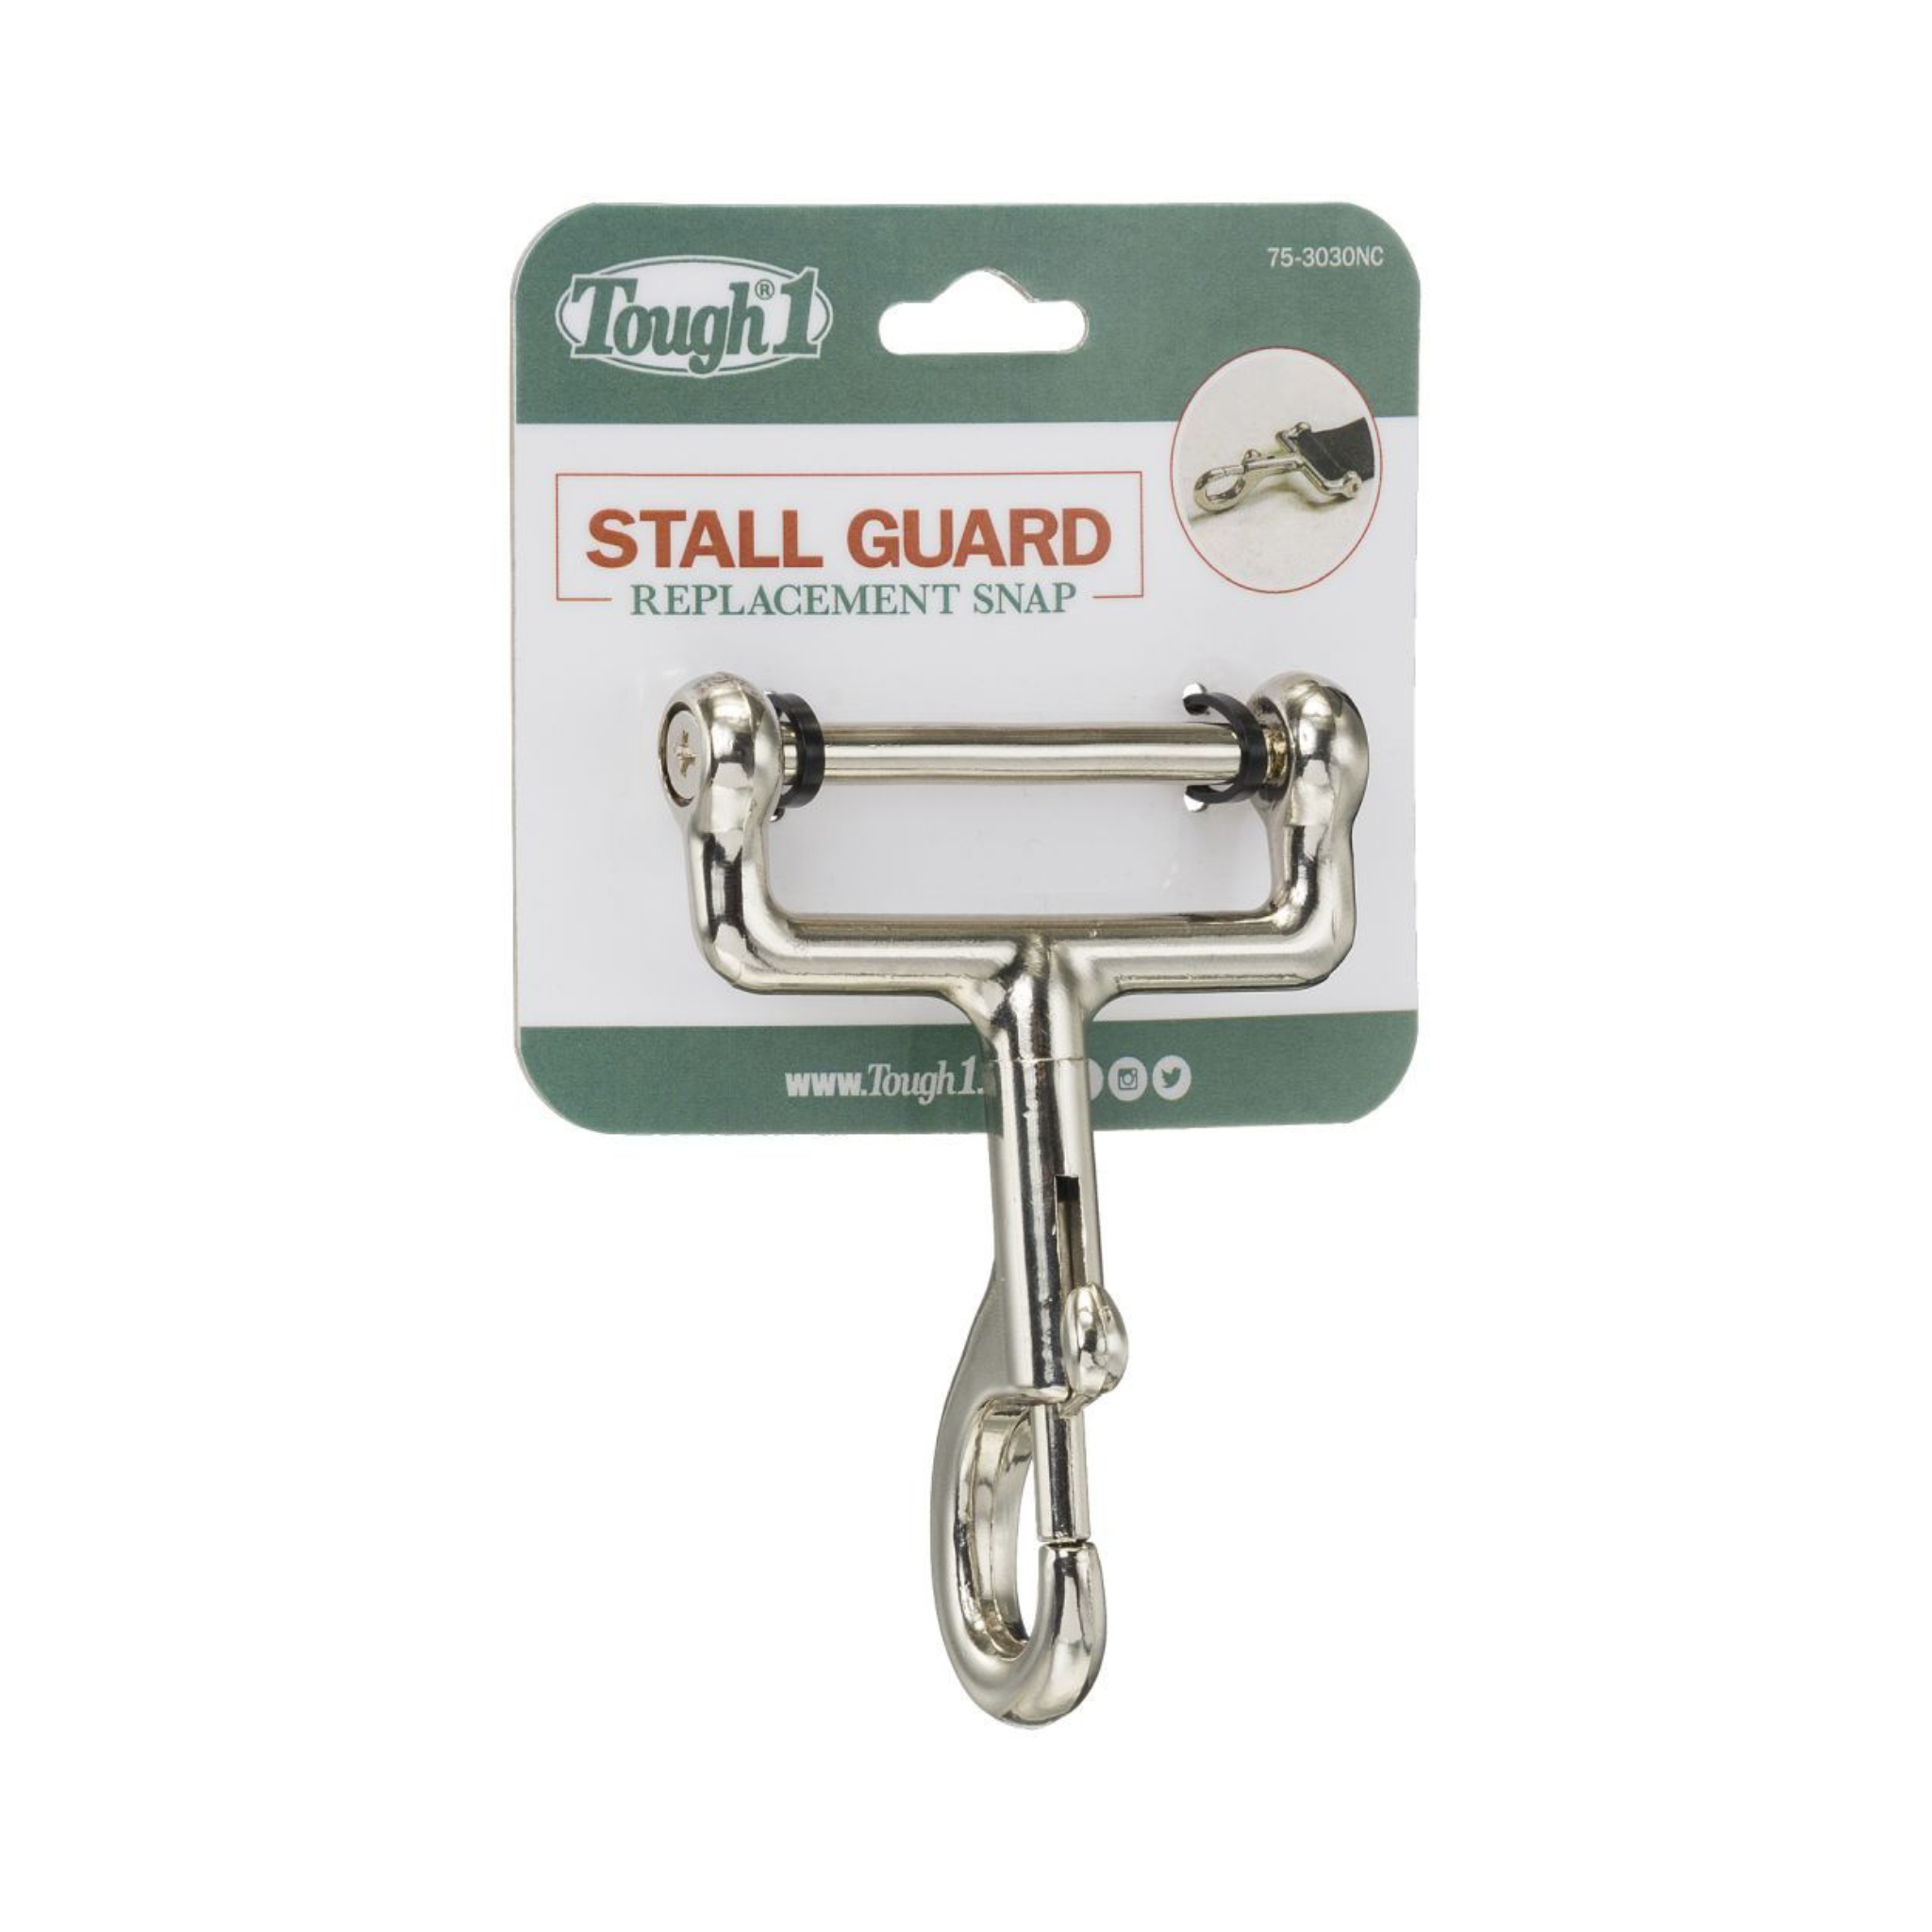 Stall Guard Replacement Snap